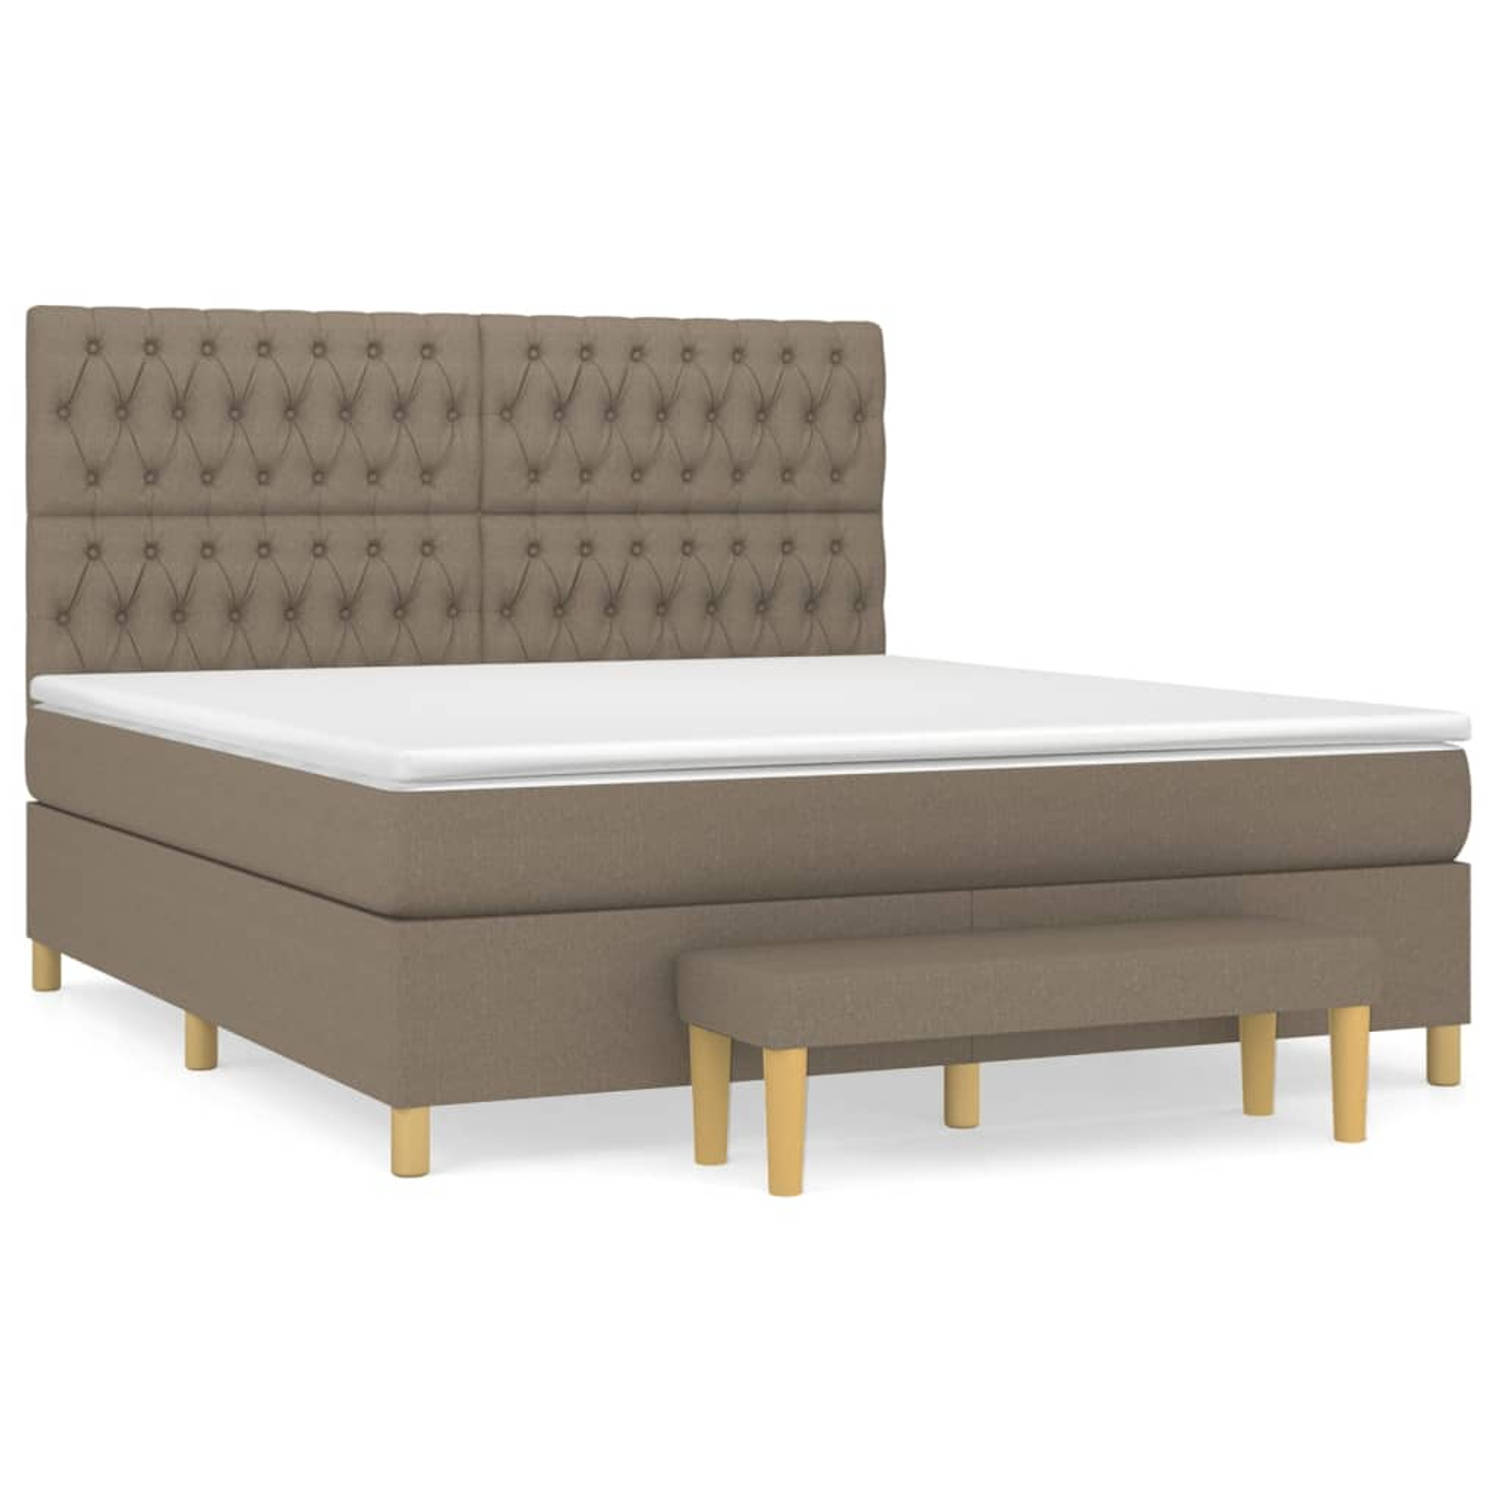 The Living Store Boxspringbed - Comfort - Bed en Matras - 203 x 180 x 118/128 cm - Taupe